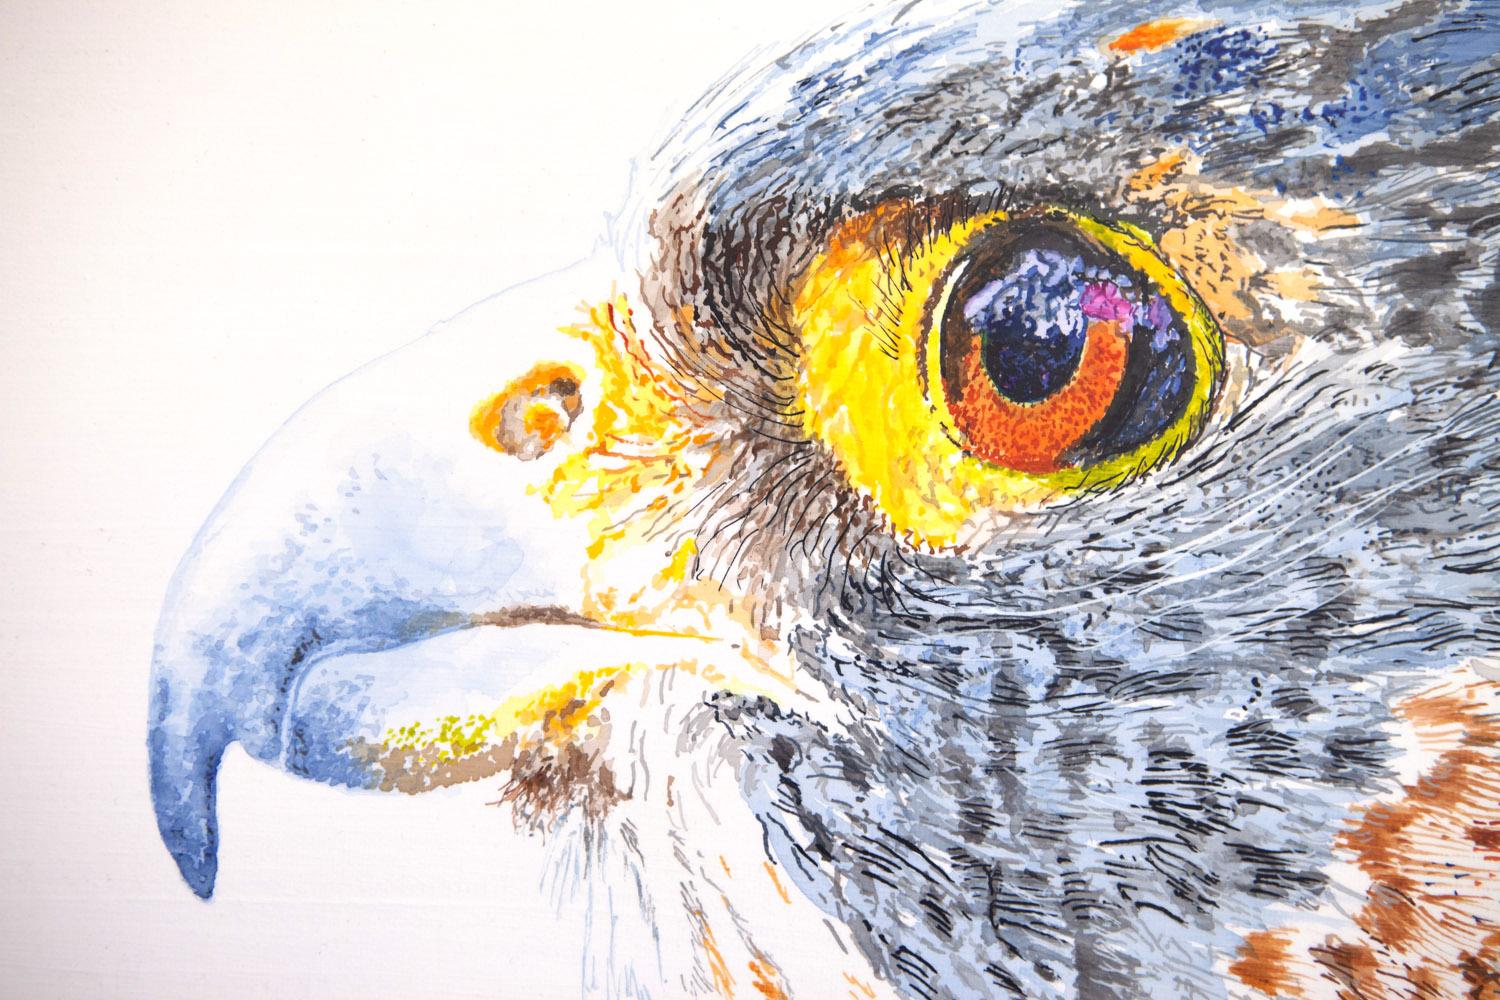 <p>Artist Comments<br>Kisa lives at the Santa Barbara Museum of Natural History. Whenever I visit her out in the museum yard, she is paying close attention to the songbirds in the nearby trees and clearly wishes she could still capture her own prey.